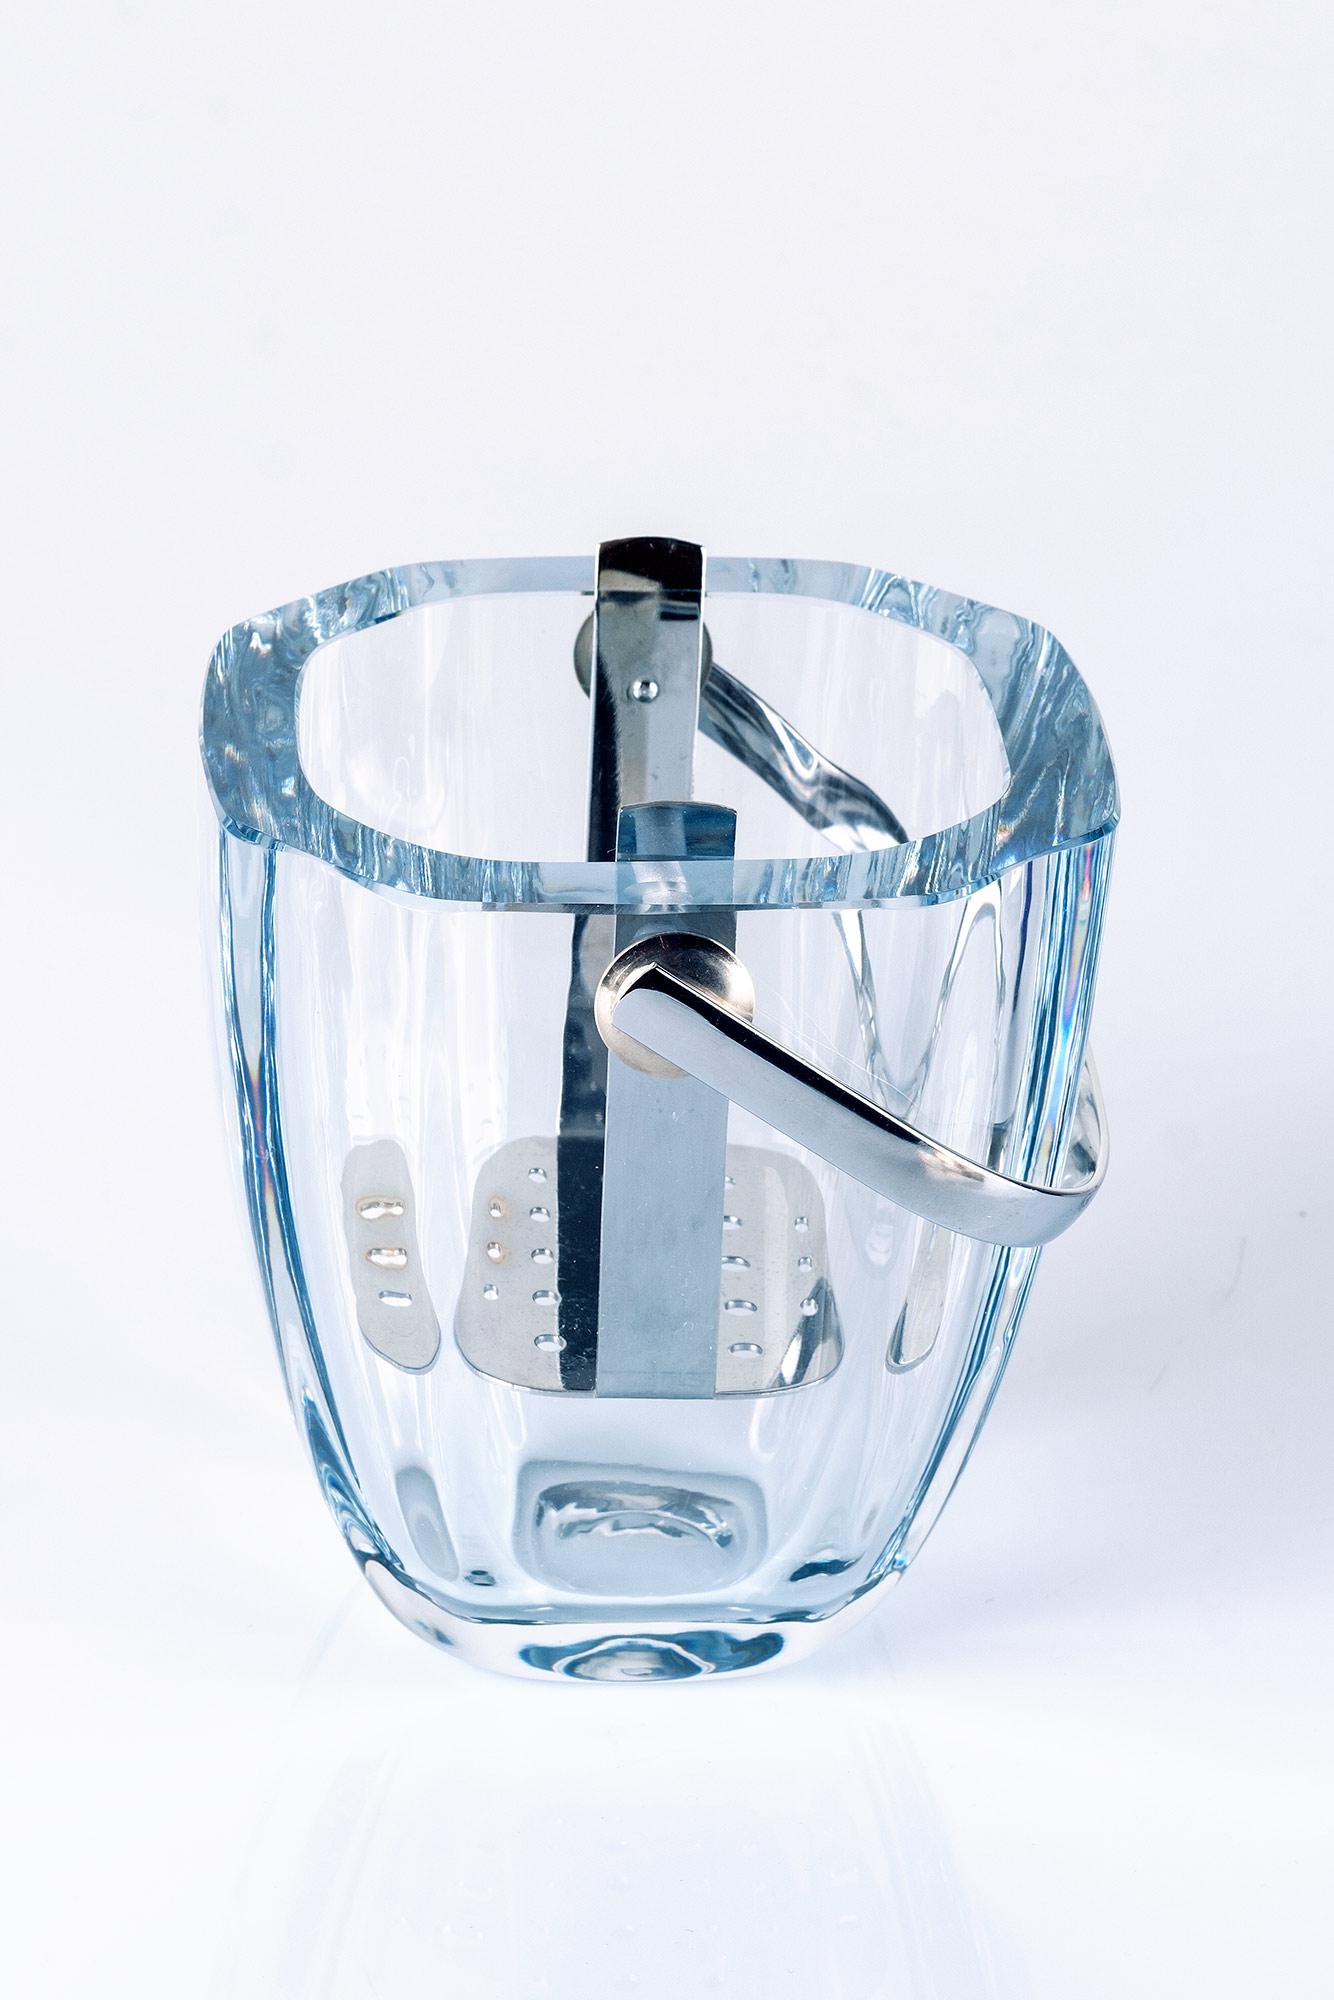 Beautiful signed Crystal Ice bucket by Strömbergshyttan, Sweden with a silver plated tong by Bugatti, Italy.